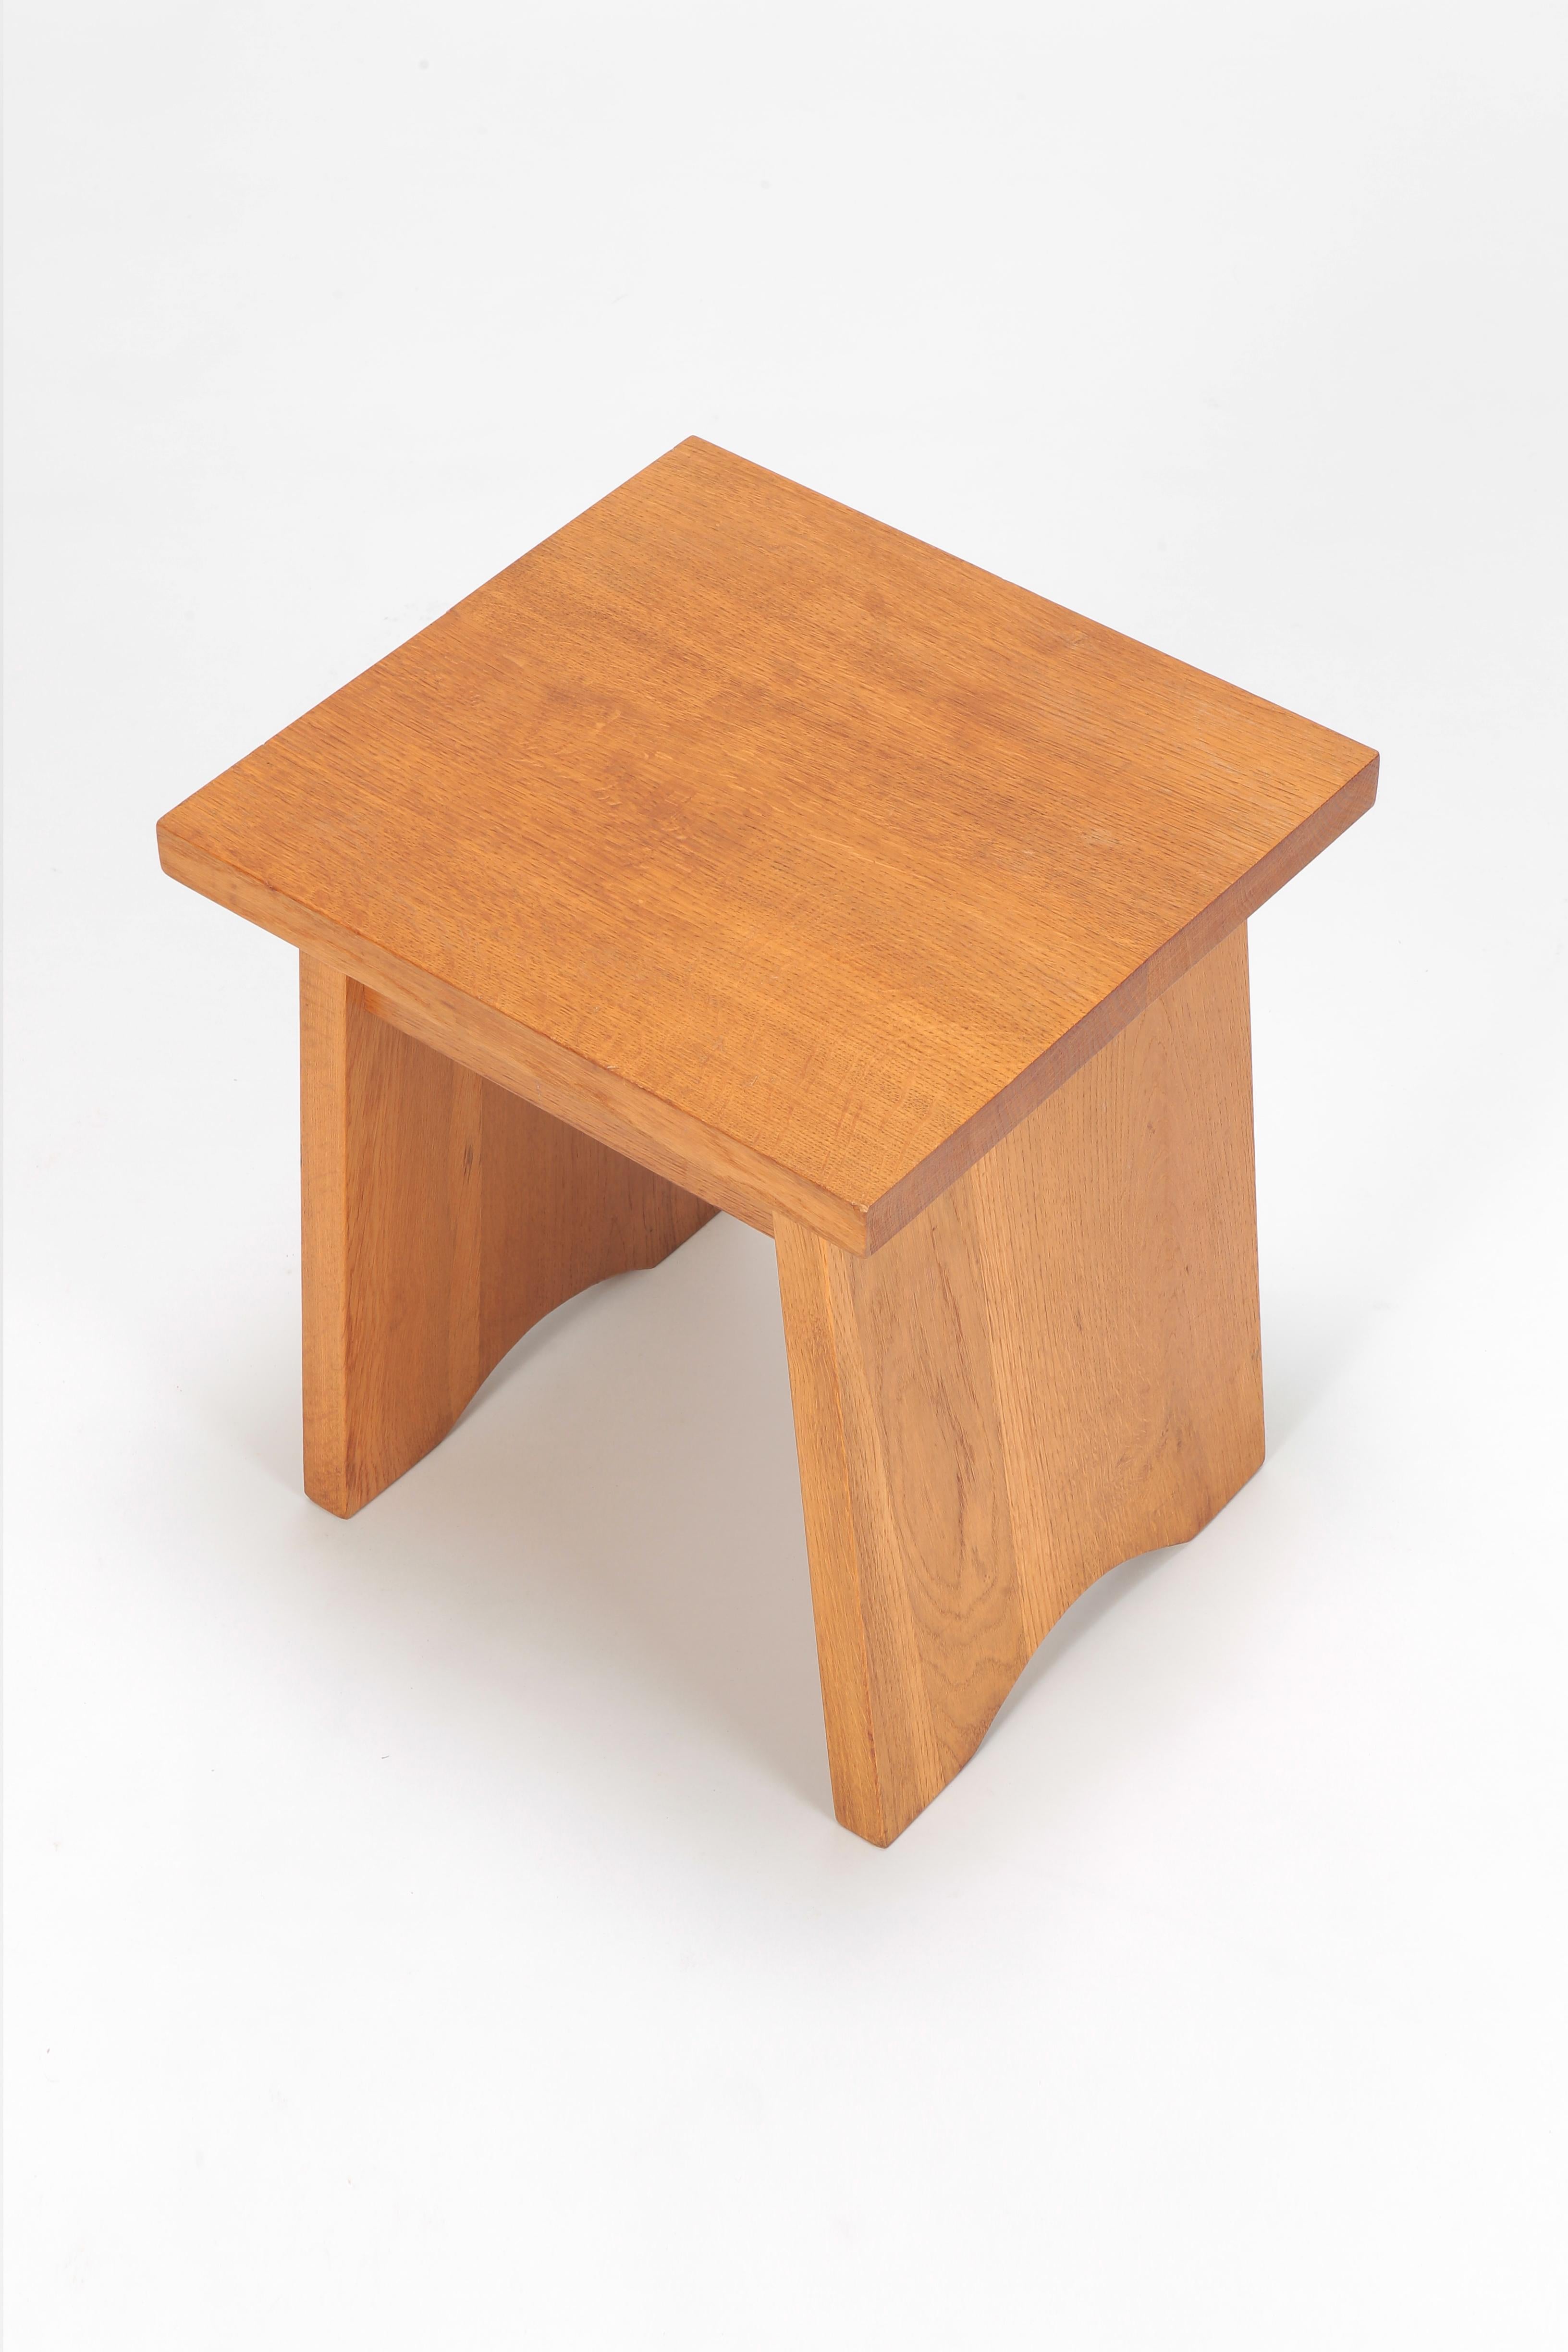 Stool manufactured in the 1940s in France. Simple design, handmade of solid oakwood. Can also be used as a side table.